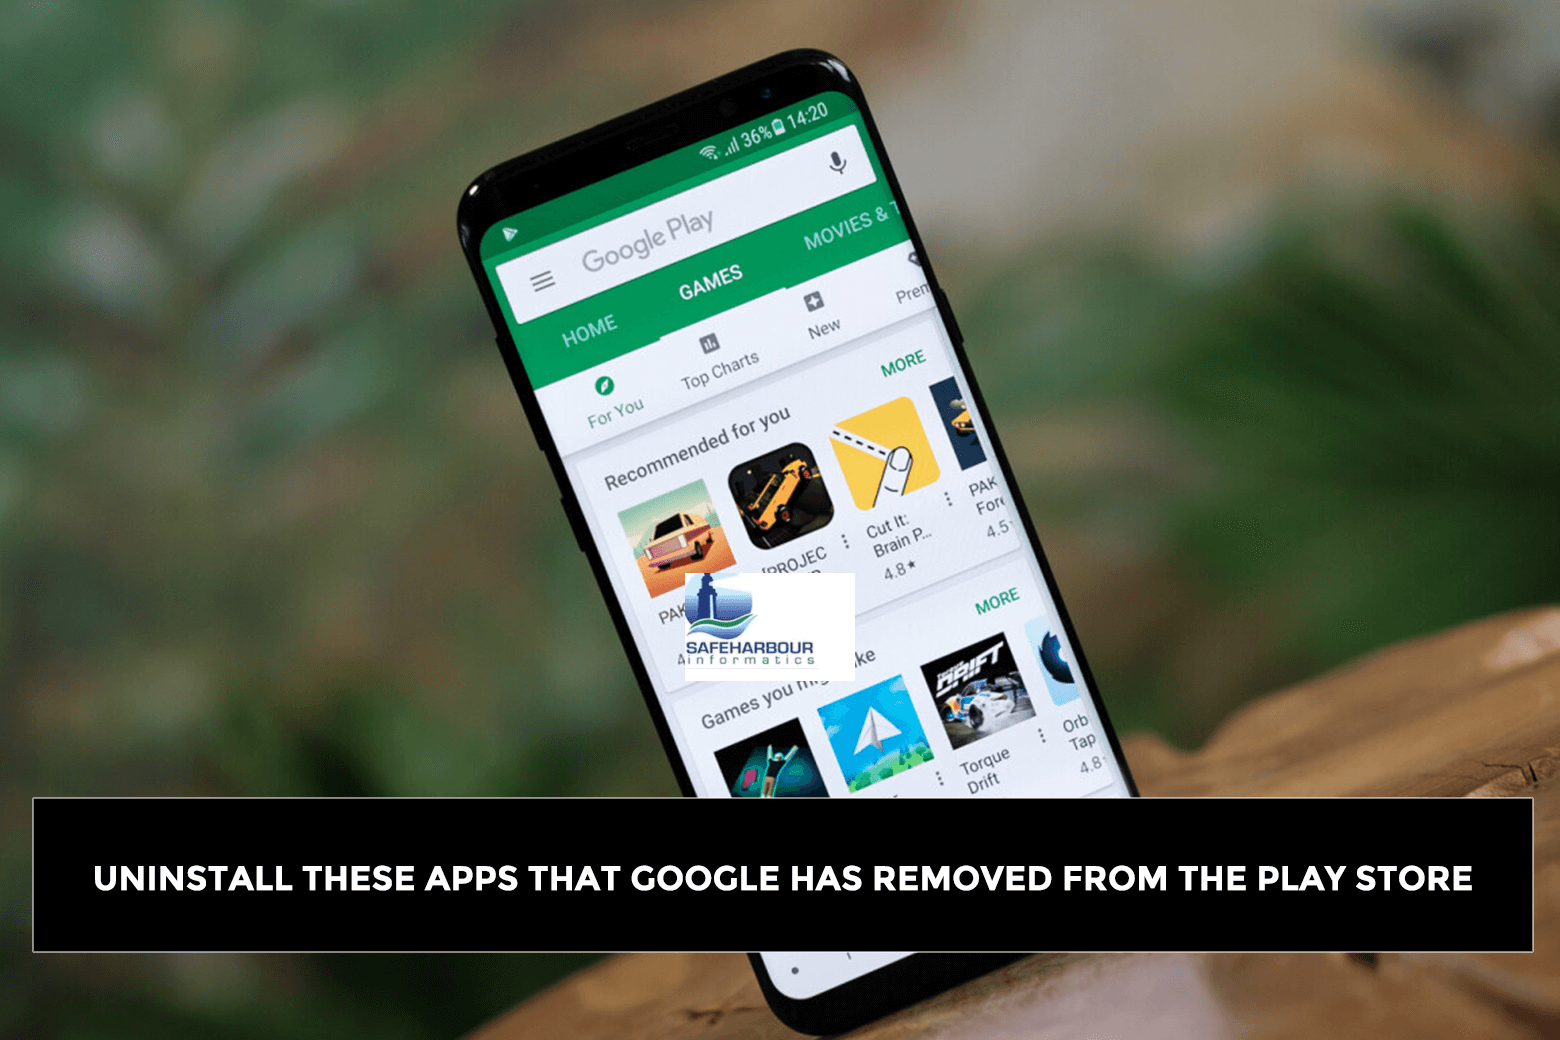 Uninstall These Apps That Google has Removed from the Play Store